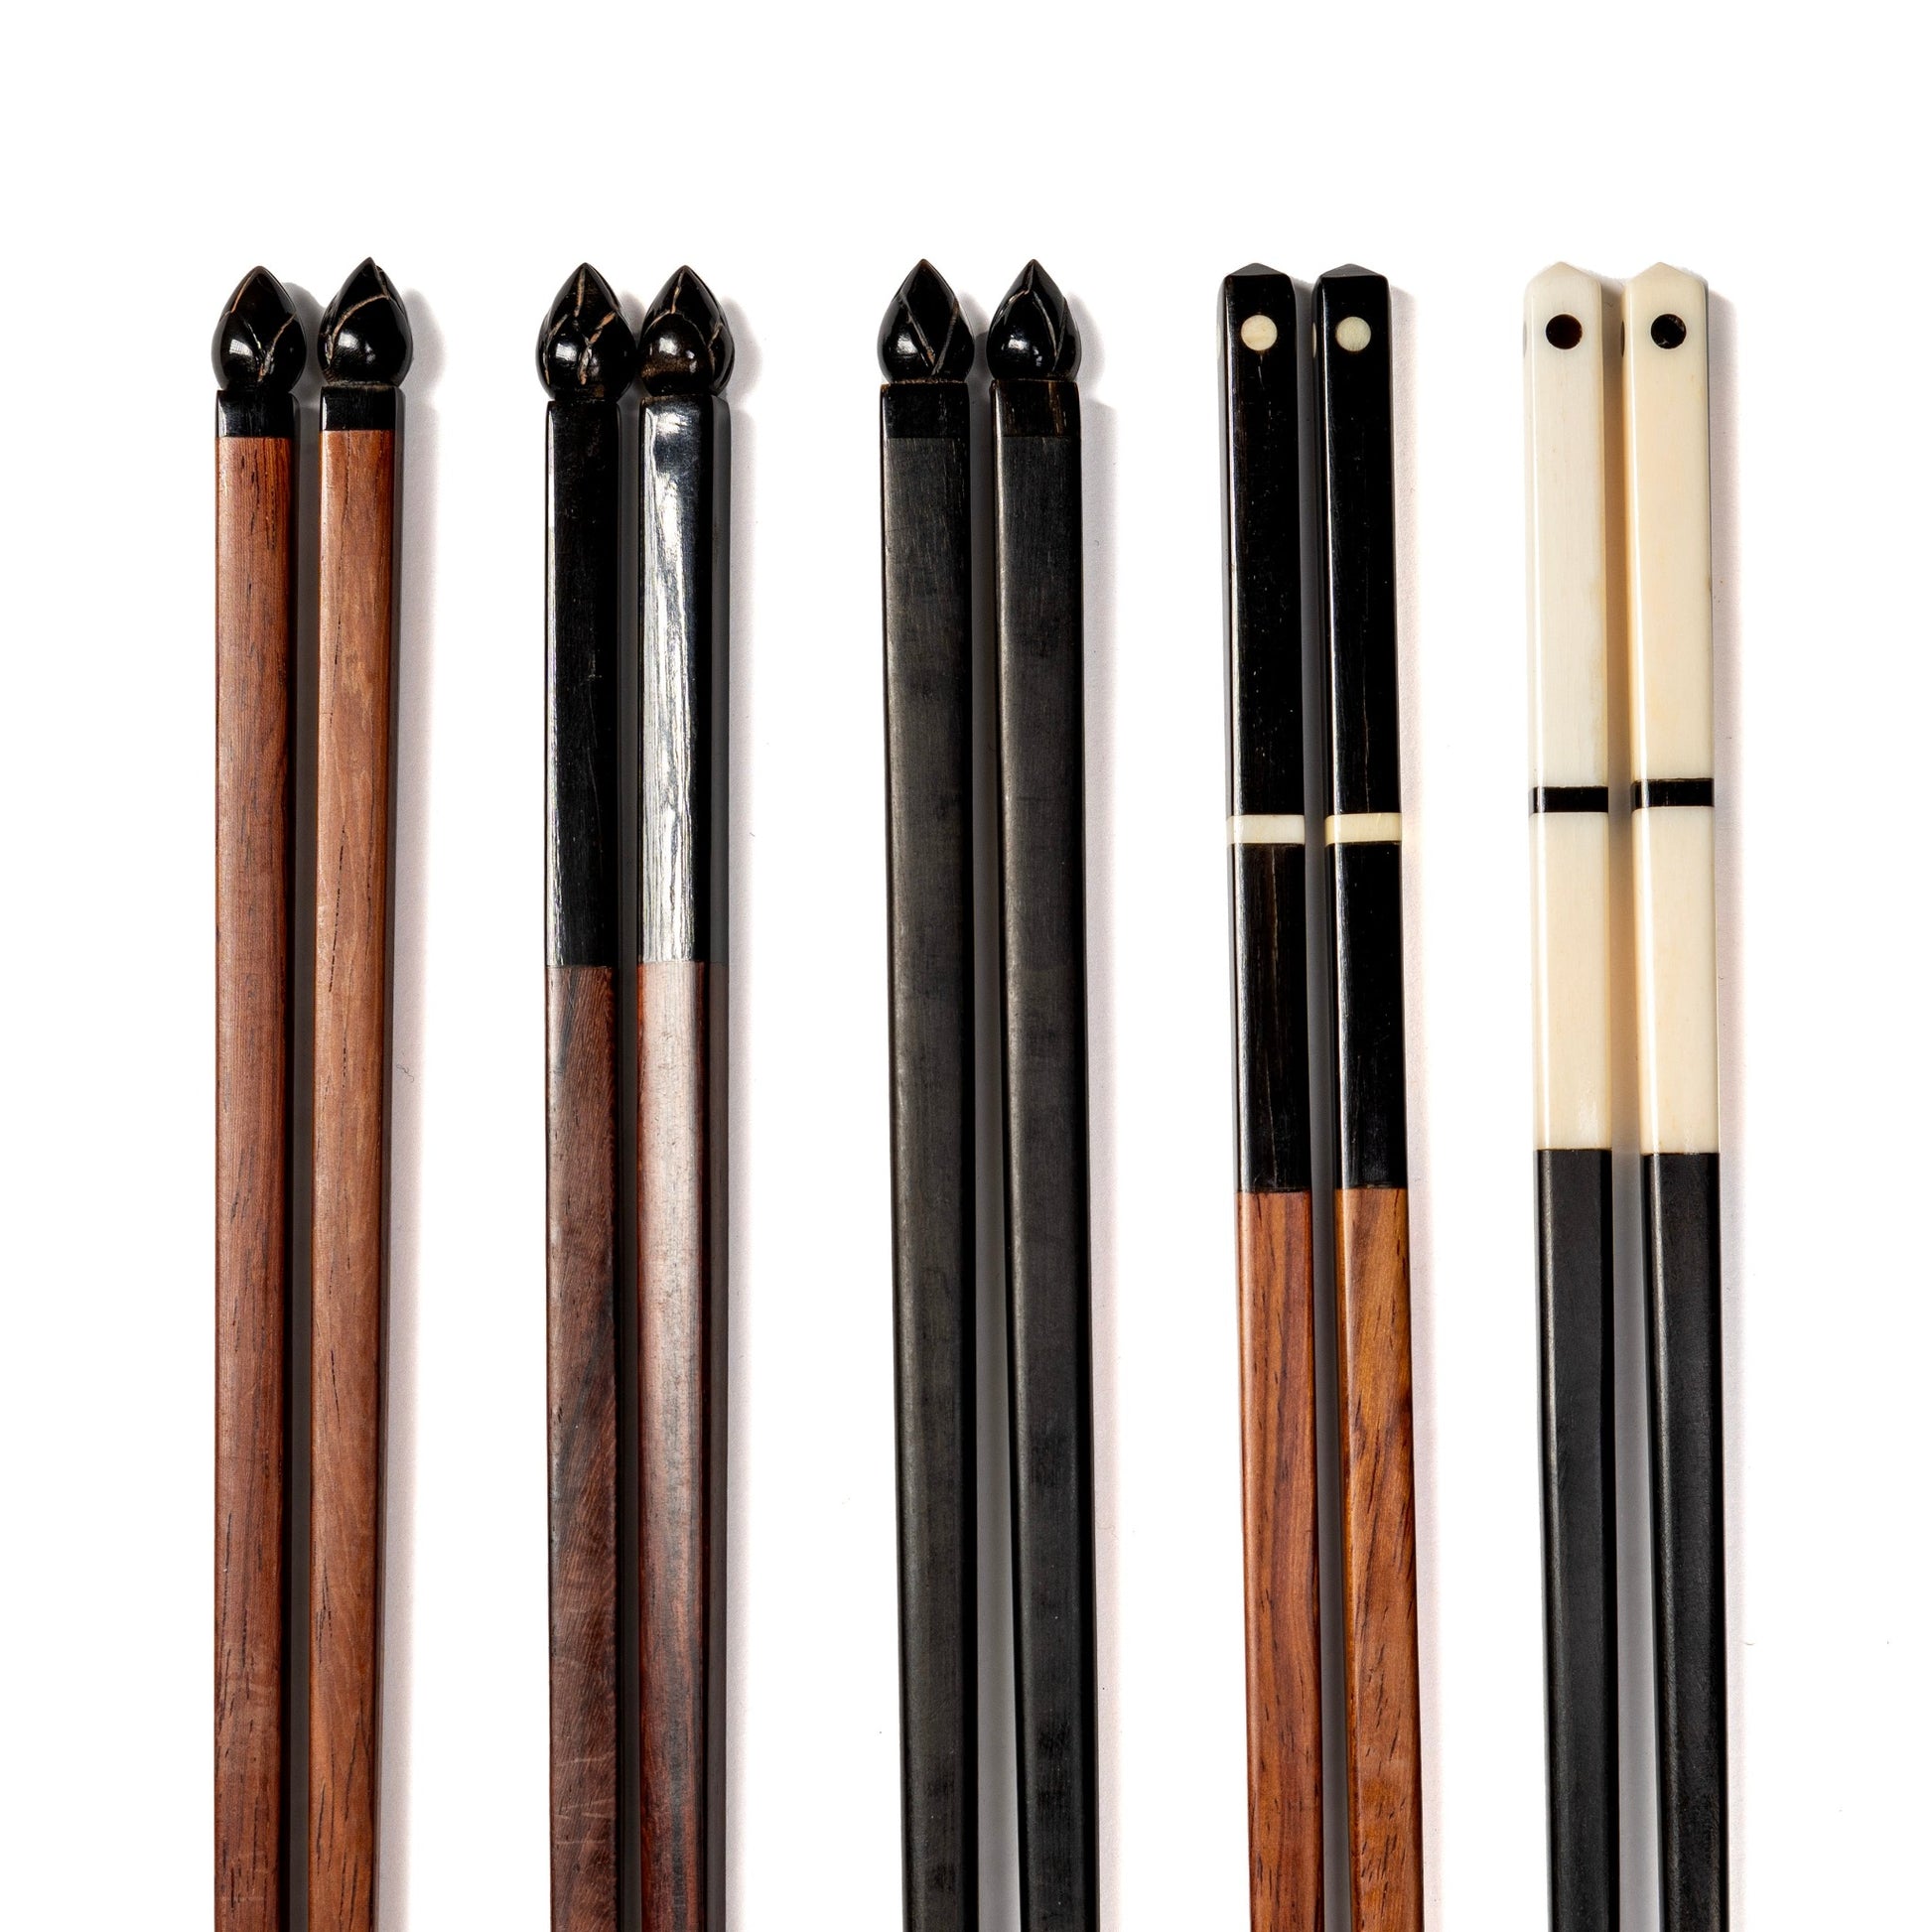 A collection of wood, bone and horn chopsticks